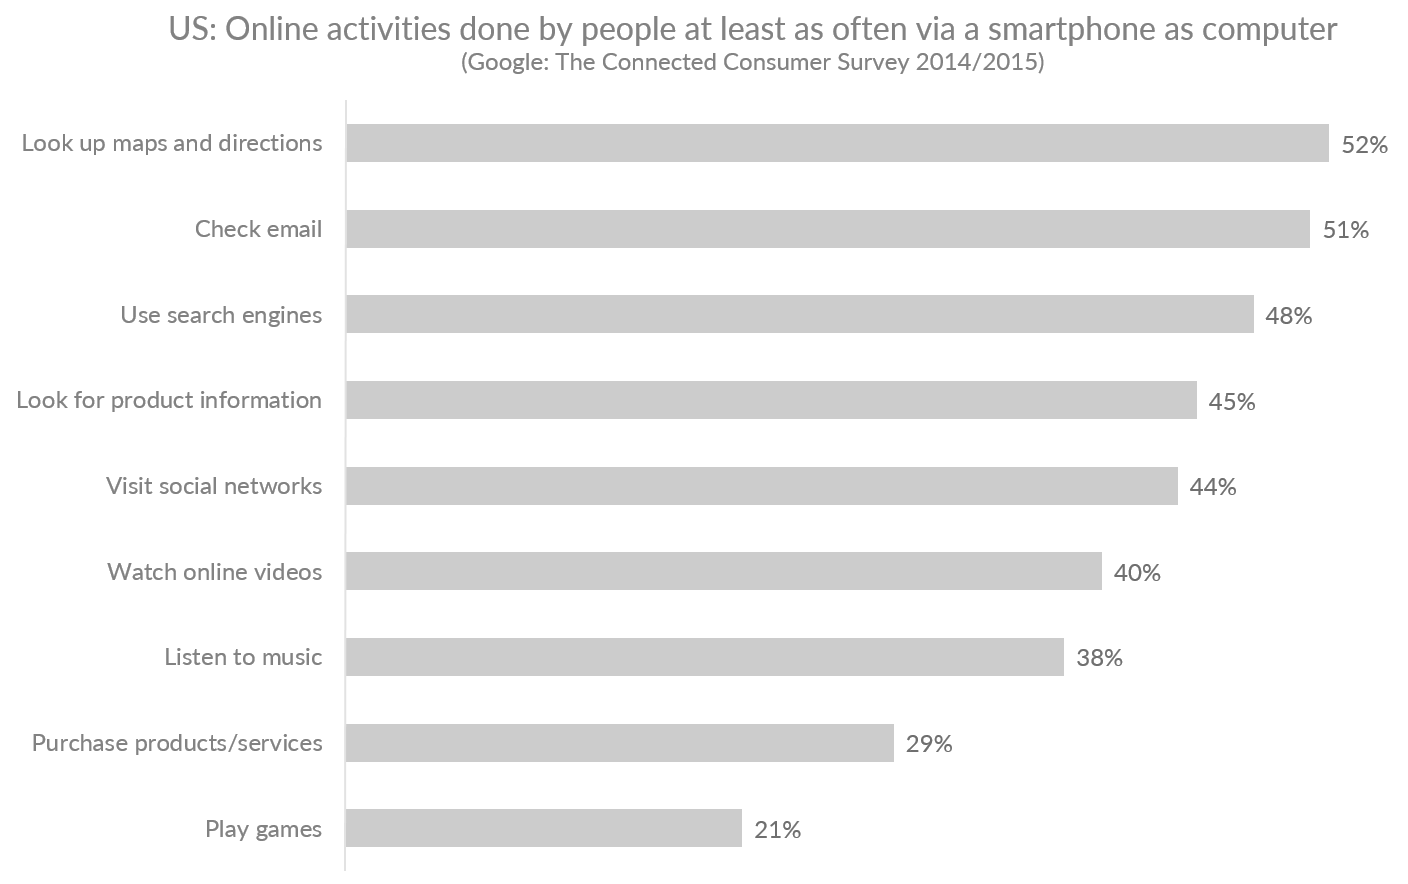 Graph showing online activities done by people in the US at least as often with a smartphone as with a computer